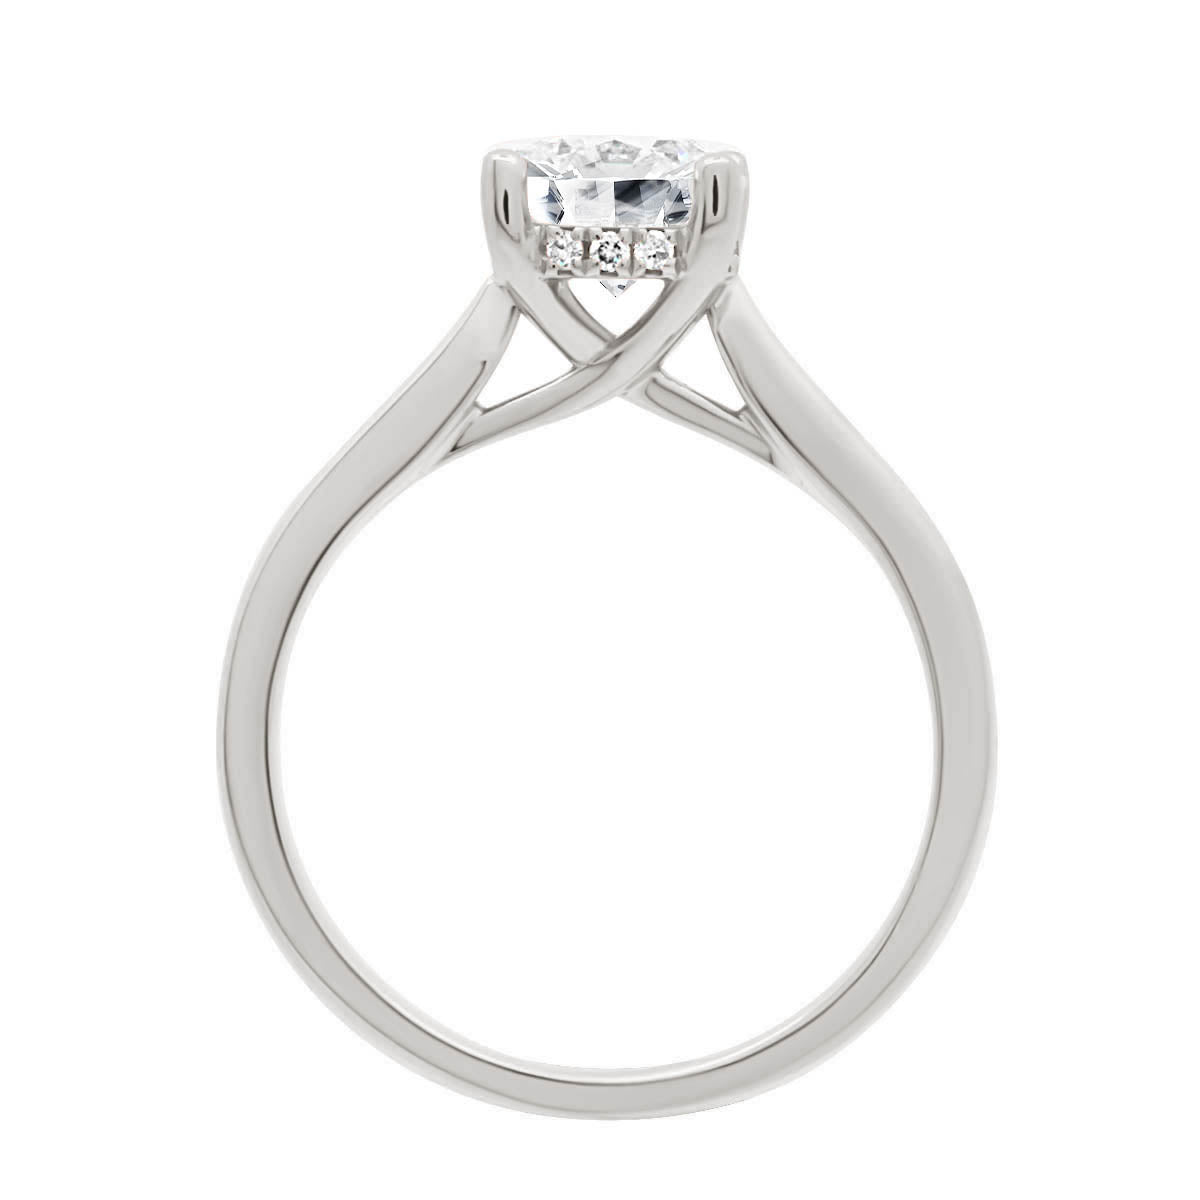 Hidden Halo Solitaire Engagement Ring in white gold in upright position